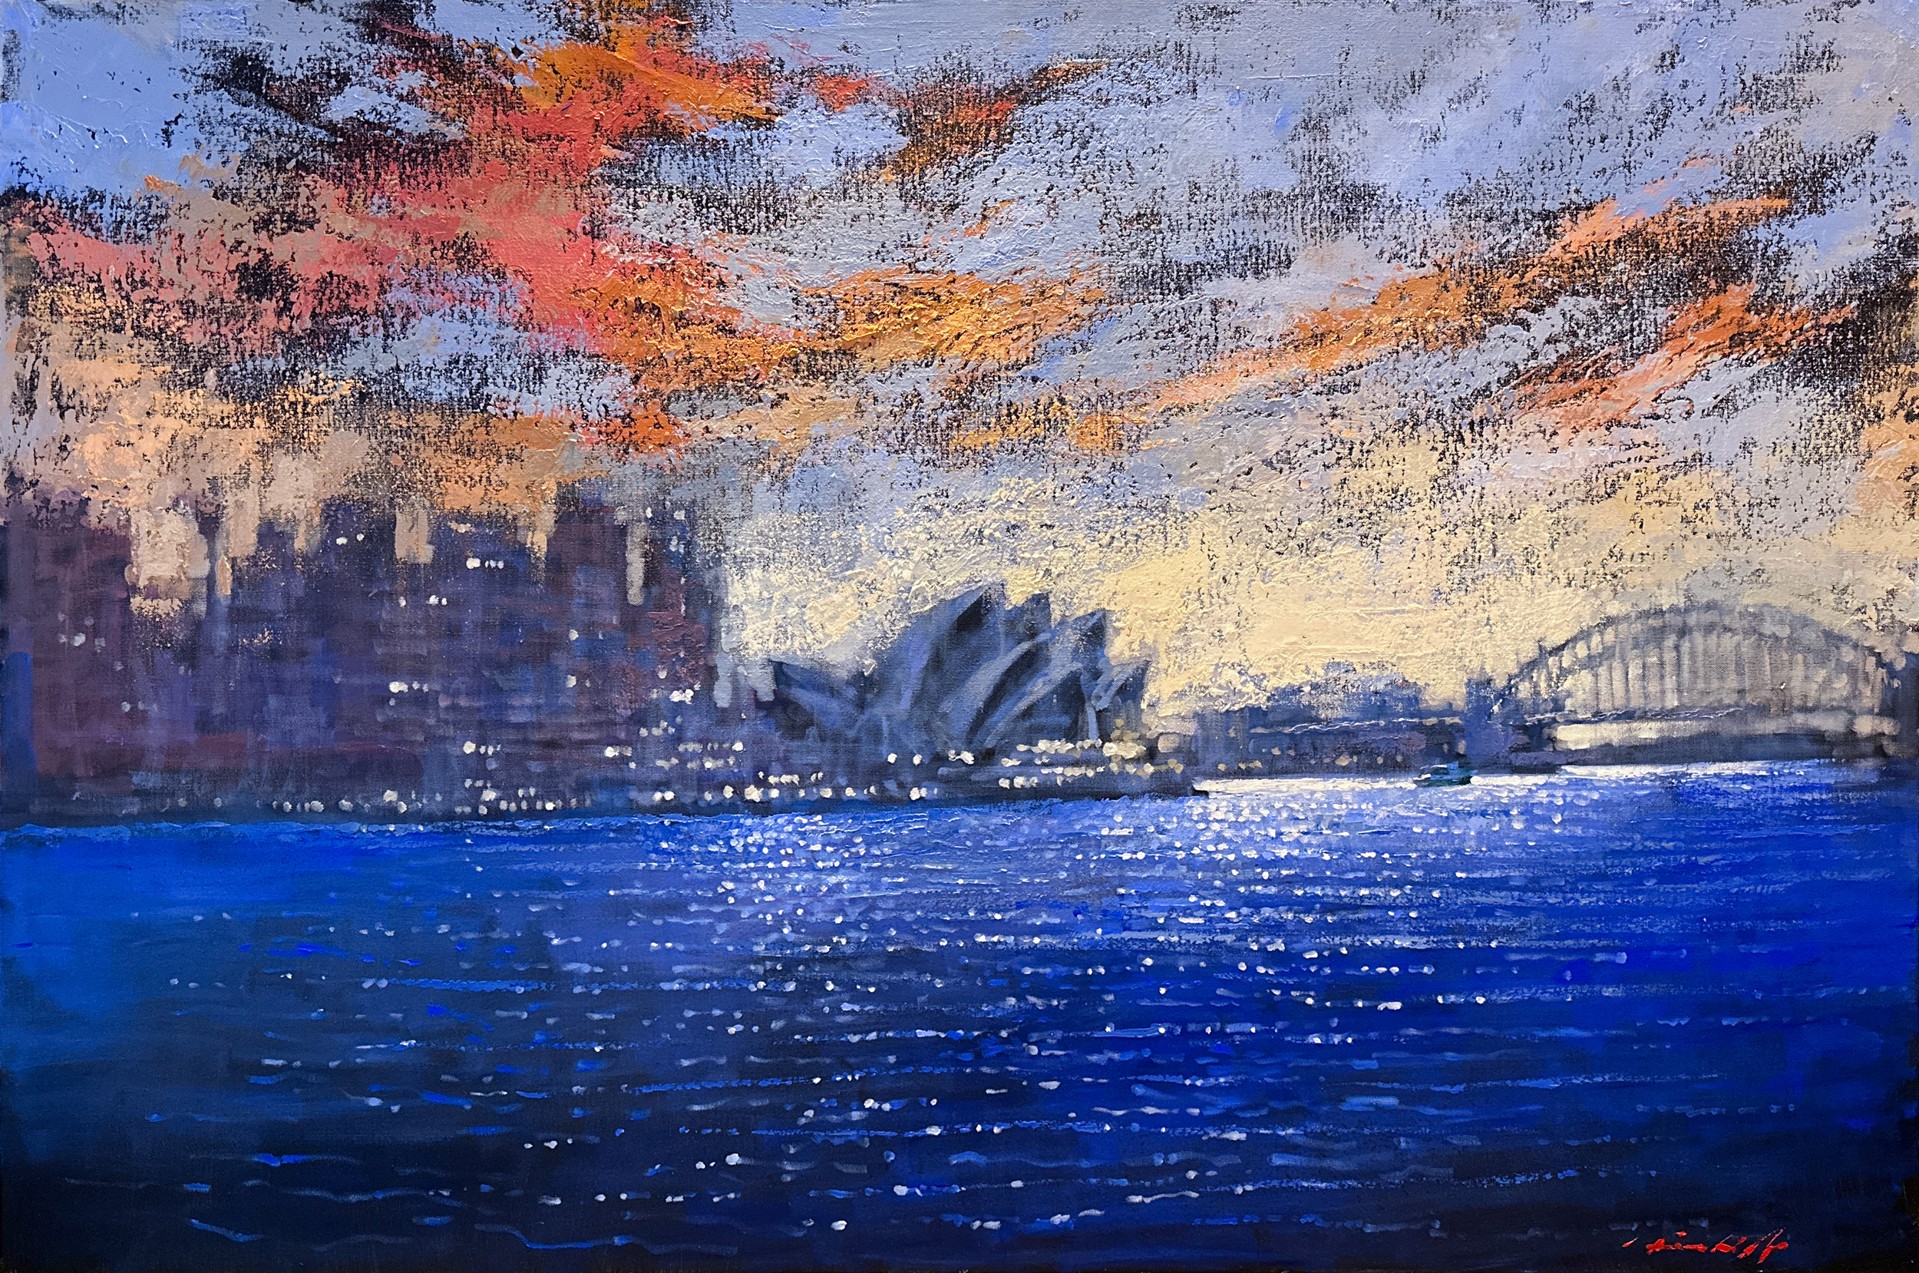 Across the Harbour by David Hinchliffe